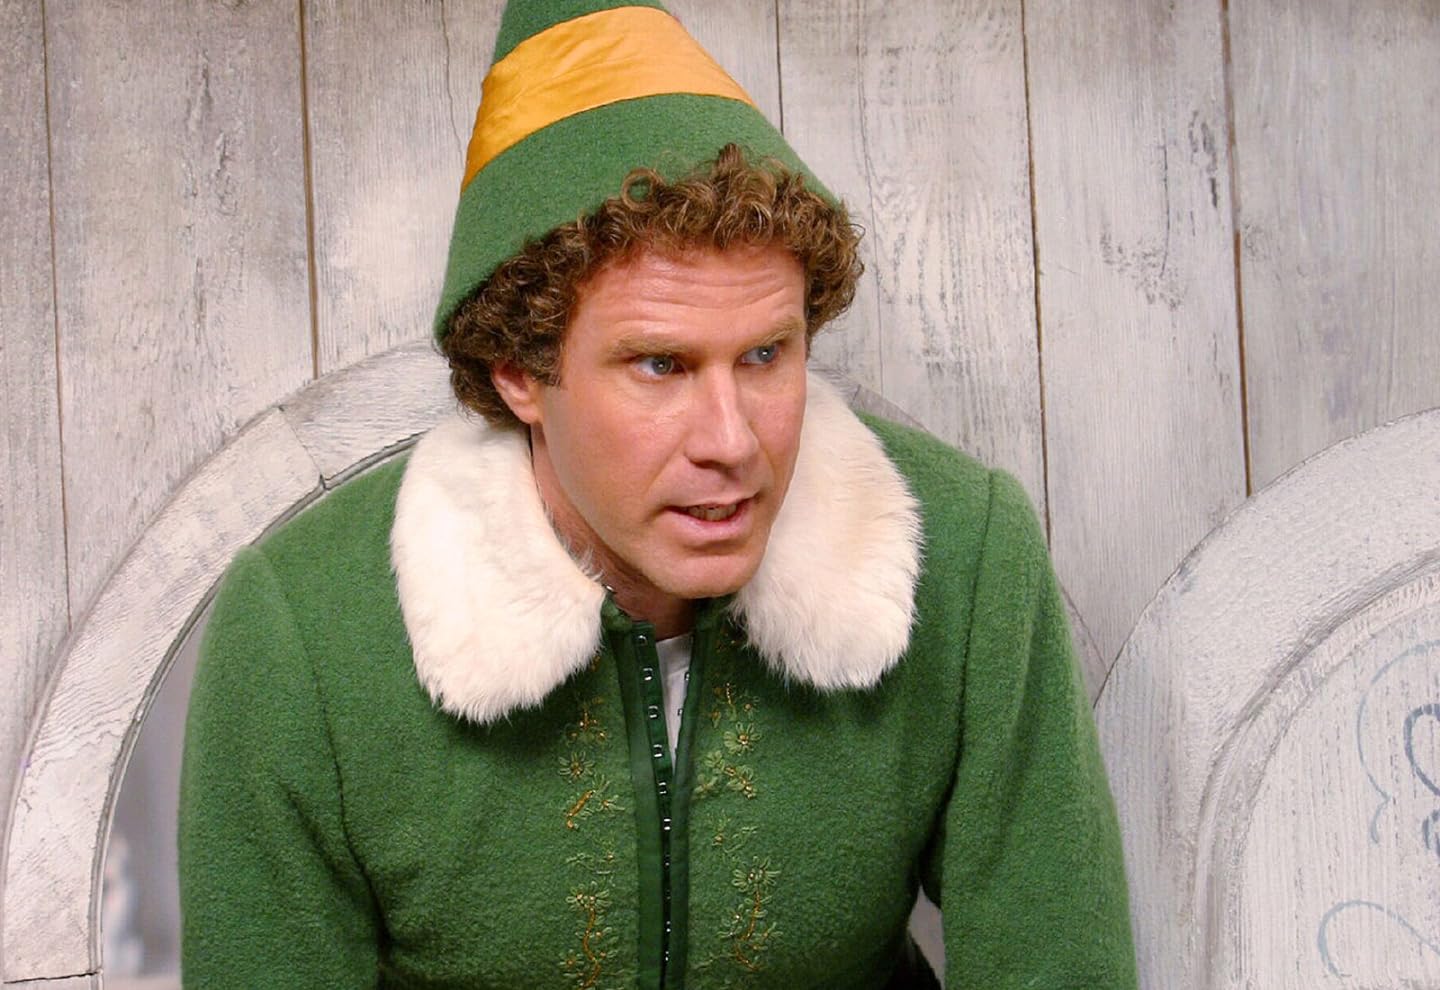 How to Watch Elf: The Movie